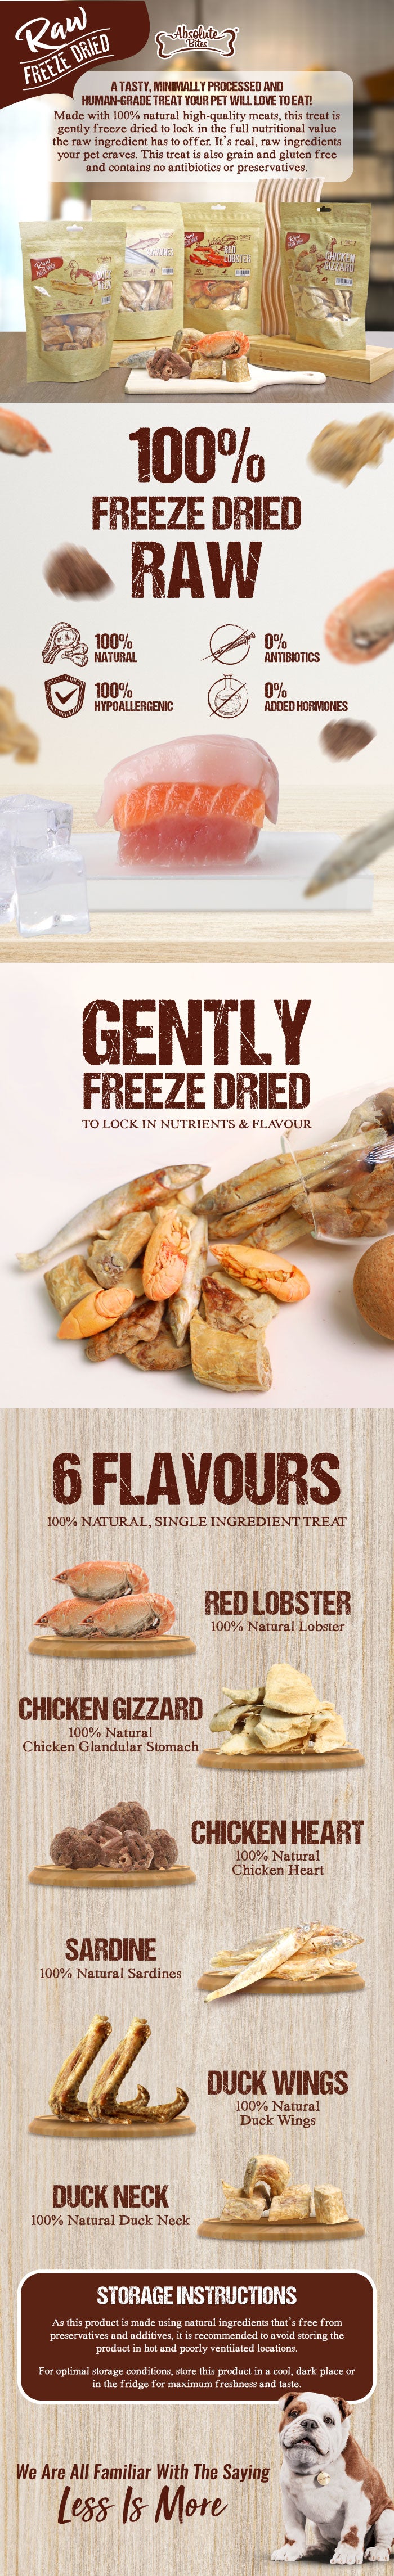 Absolute Bites Single Ingredient Freeze Dried Raw Treats for Cats & Dogs - Chicken Fillet (70g)